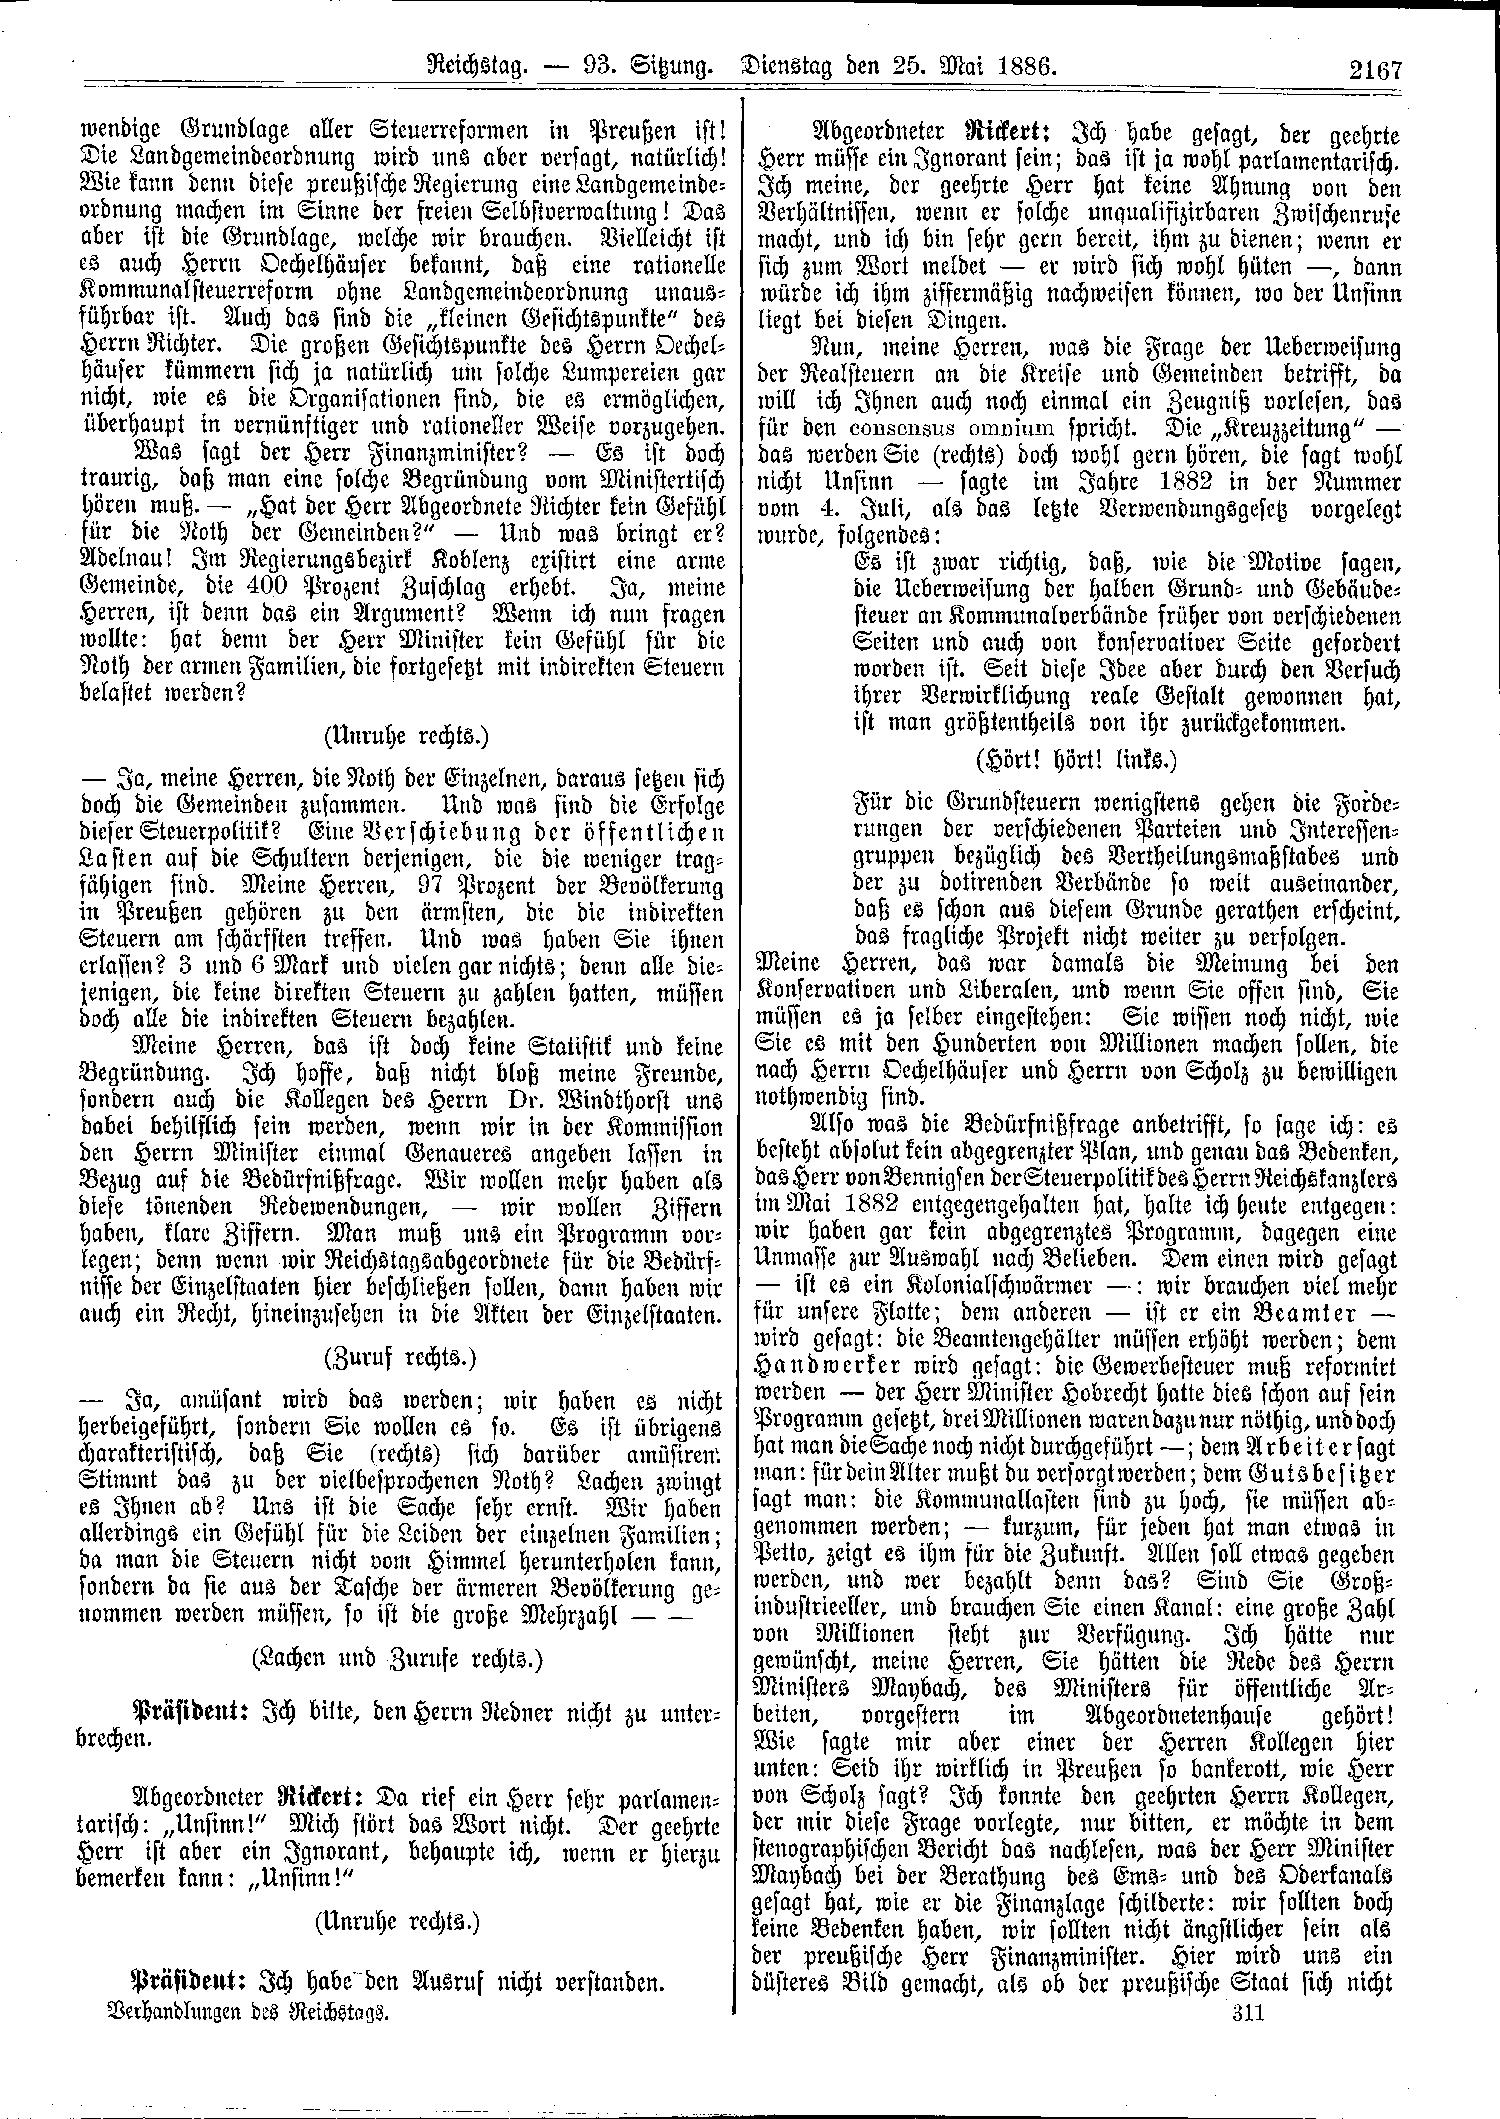 Scan of page 2167